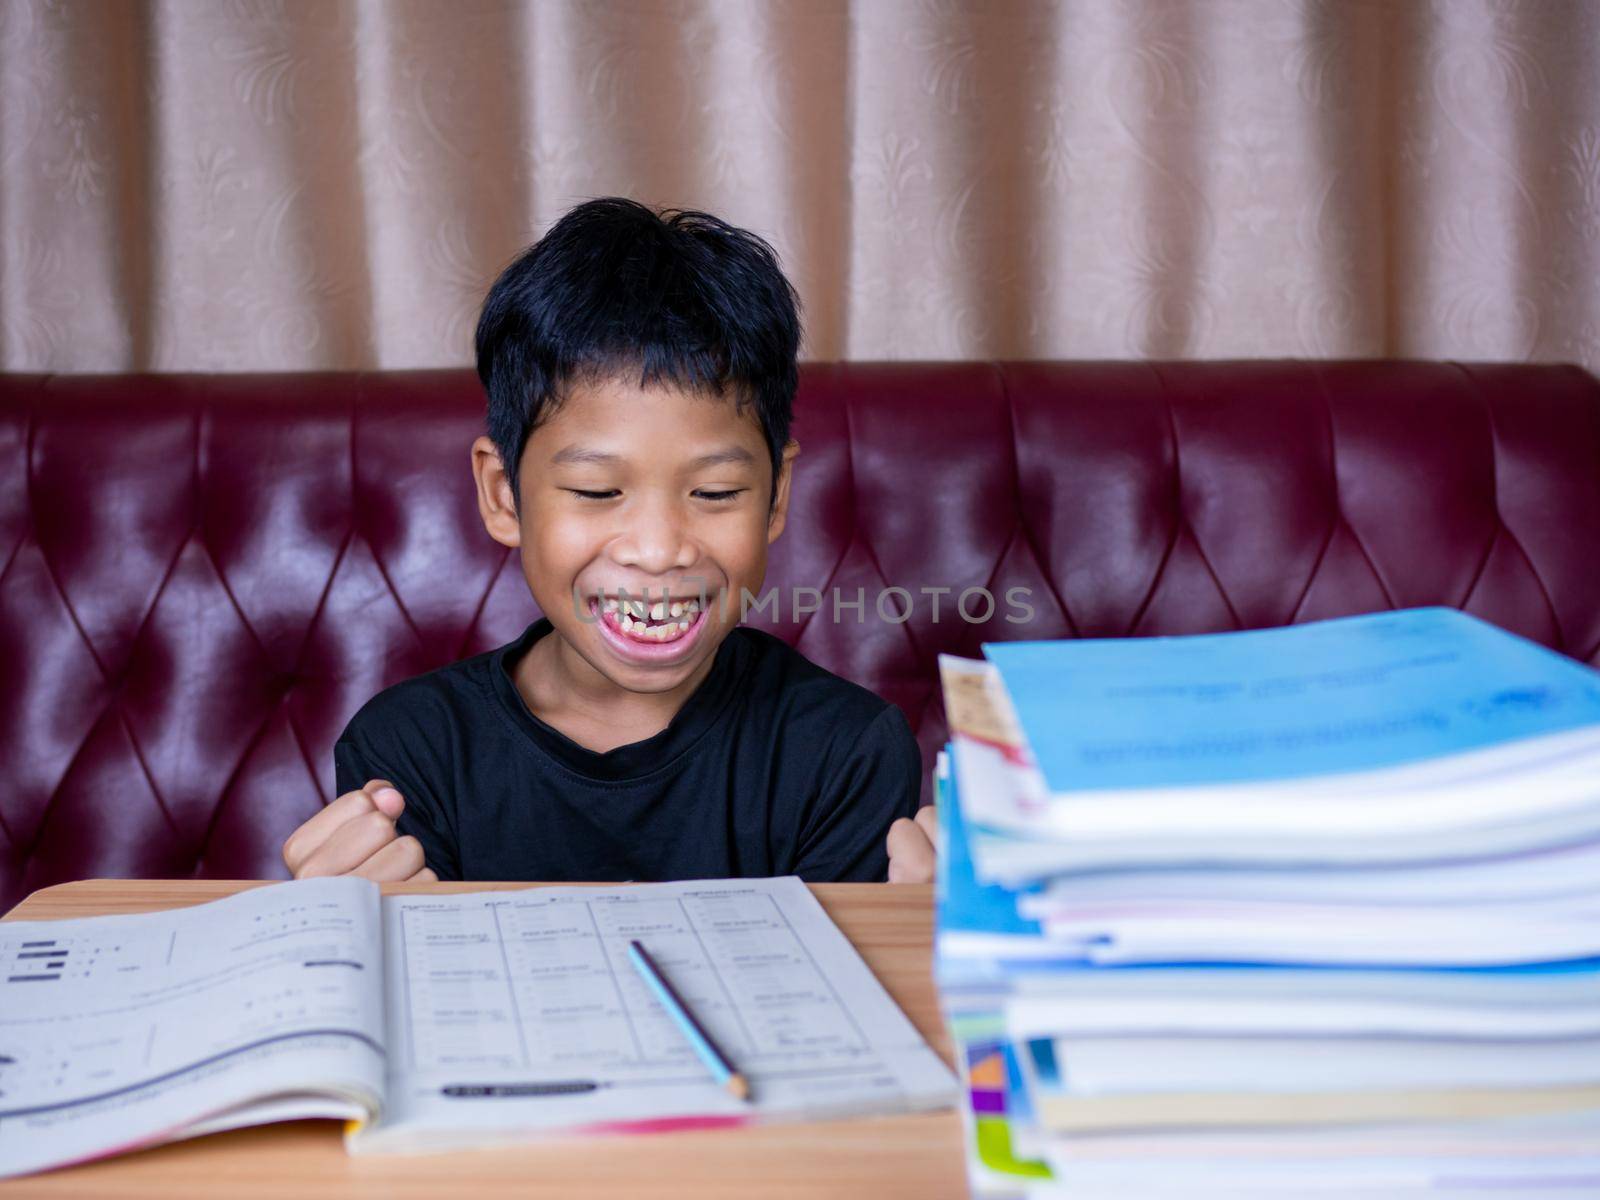 The boy was very happy to finish his homework. He sat on a wooden table and had a stack of books next to it. The background is a red sofa and cream curtains. by Unimages2527